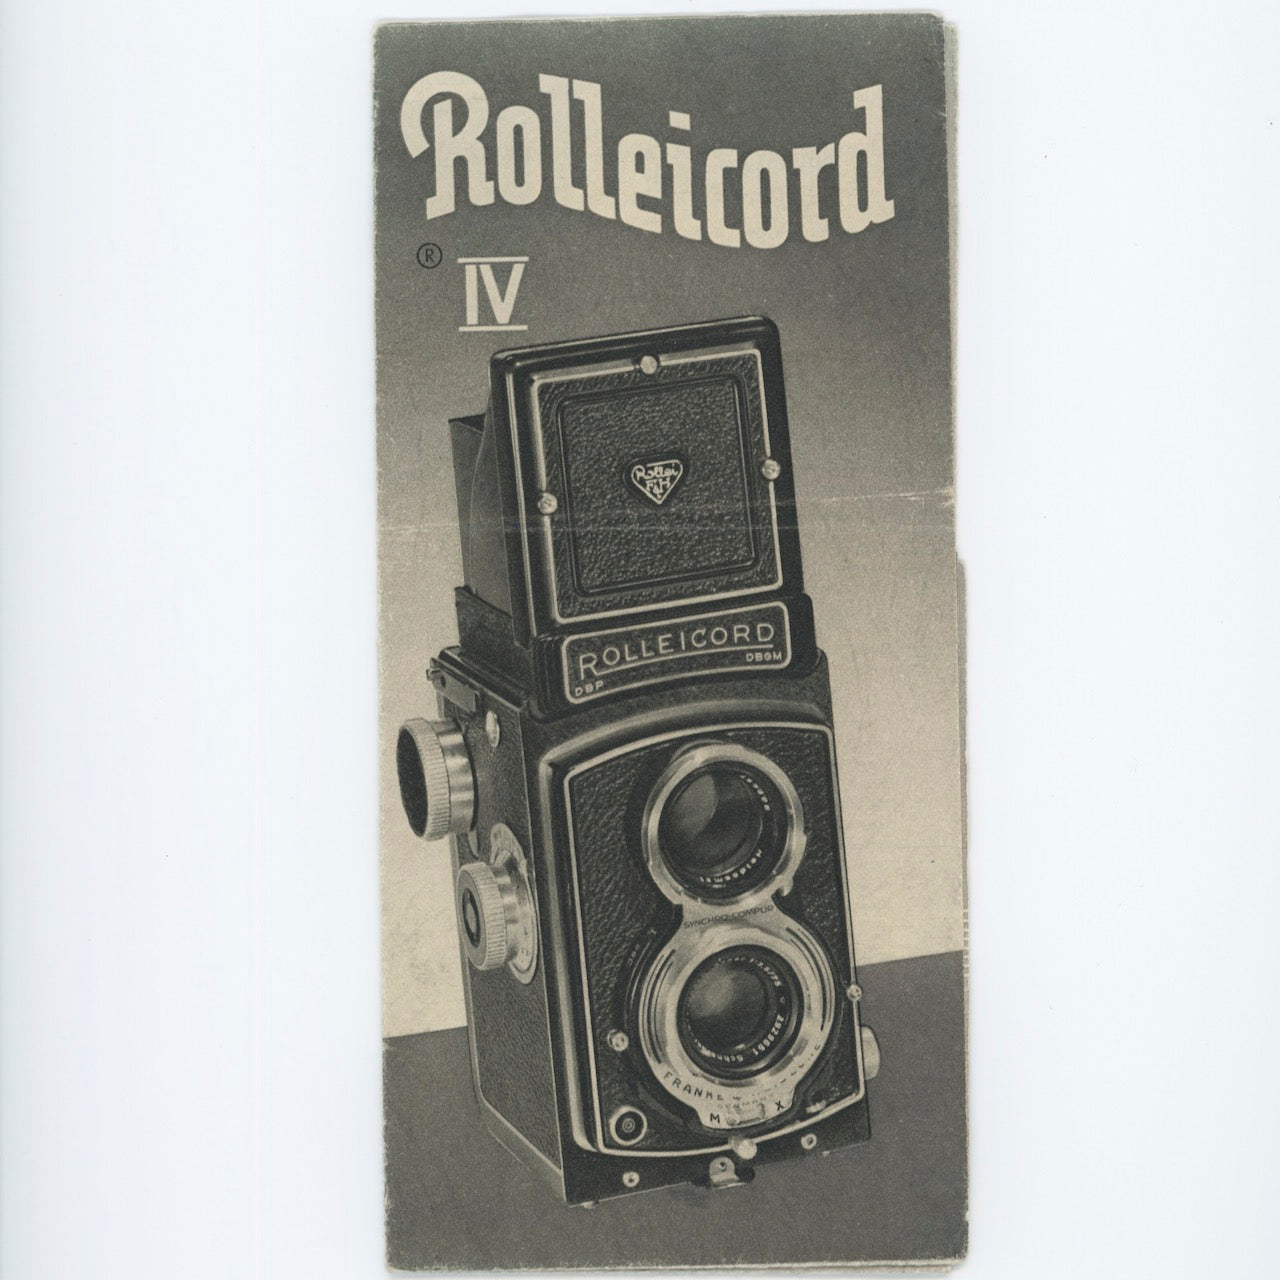 Rollei Rolleicord IV Brochure.